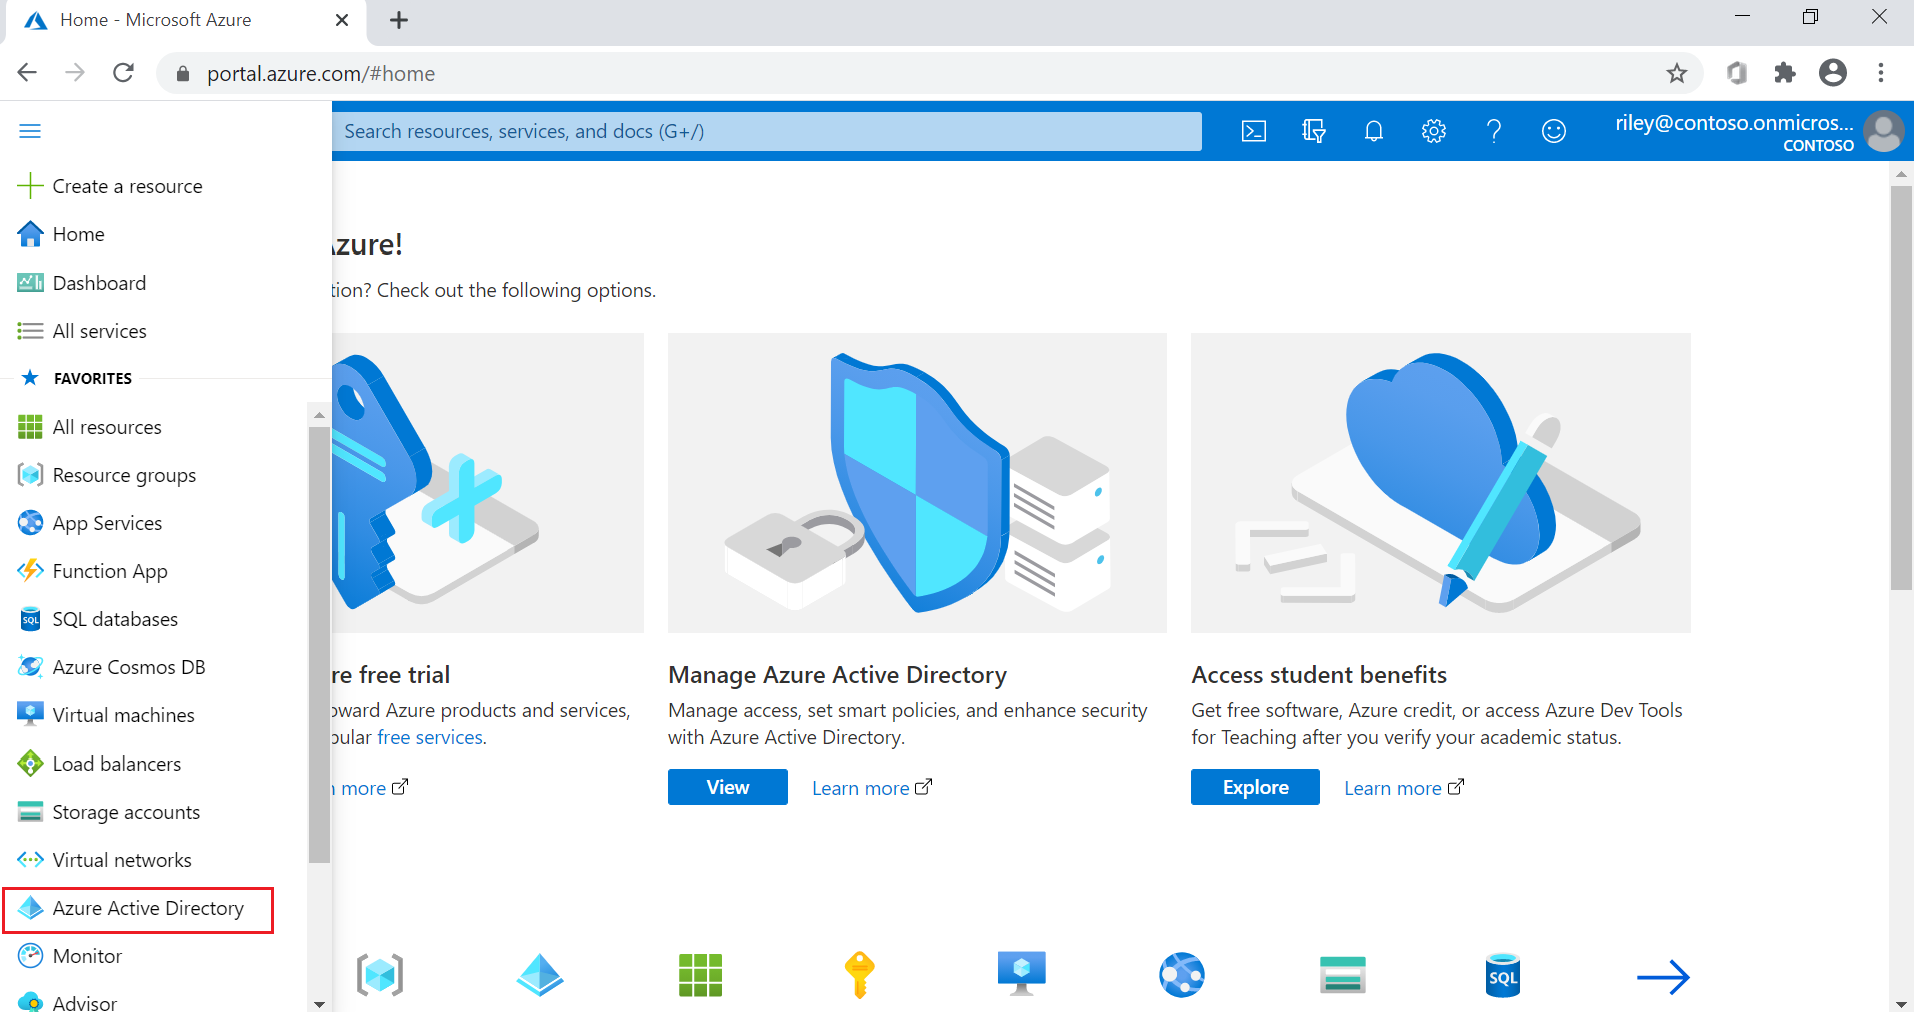 Shows Azure portal selecting the Azure Active Directory option from the menu.